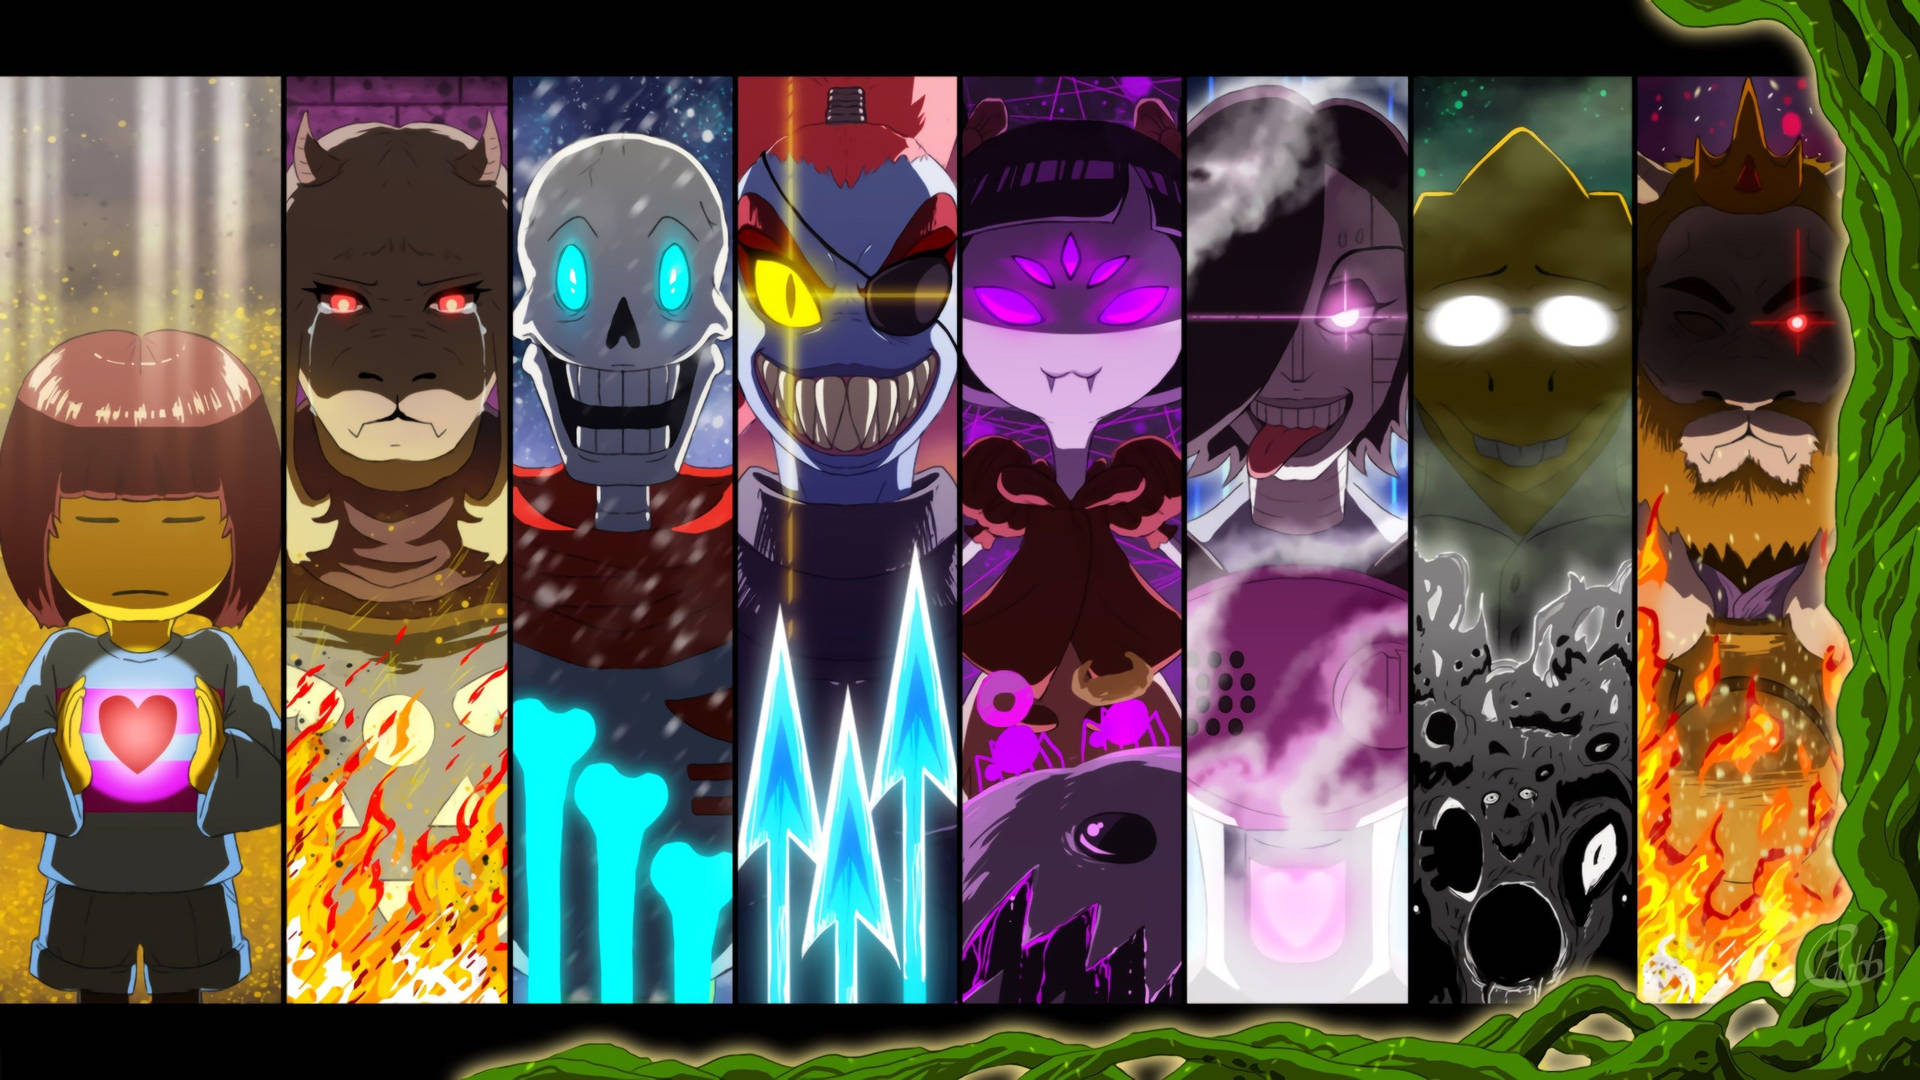 Undertale panel collage of characters wallpaper.